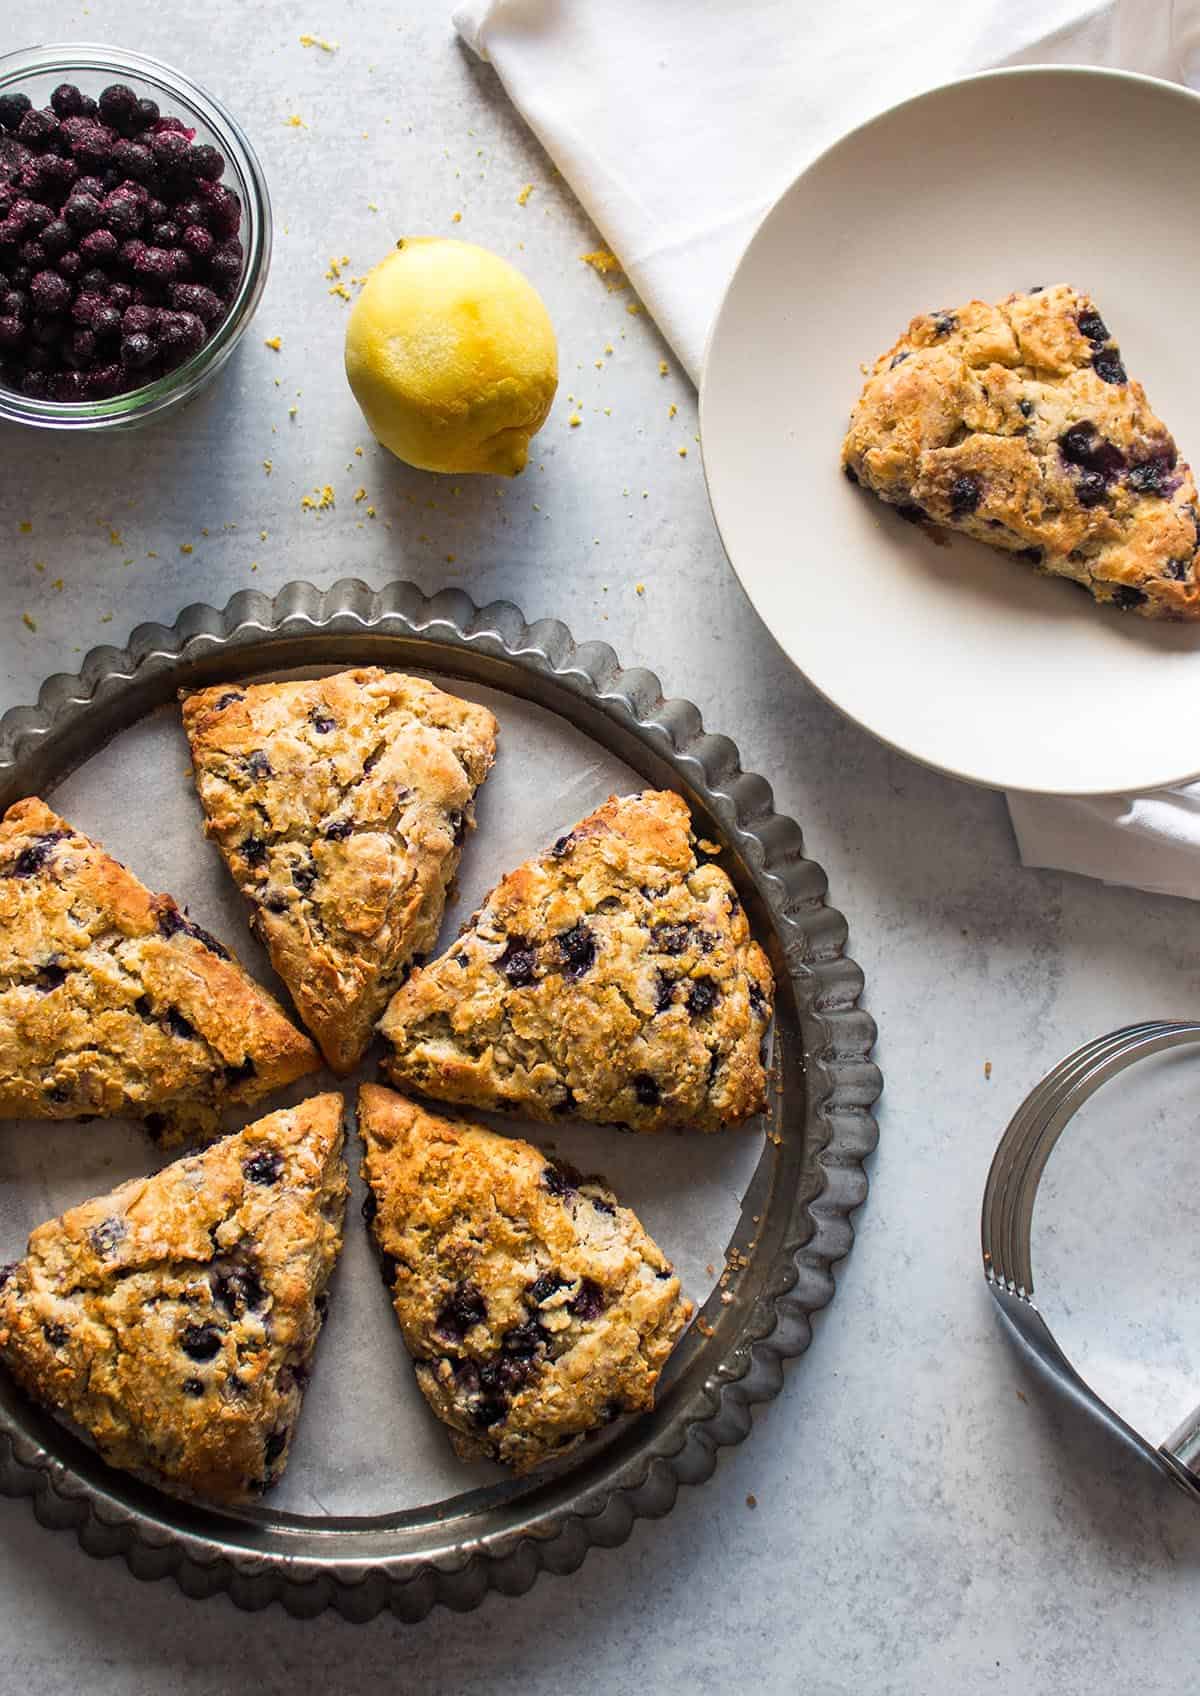 A tart tin with 5 blueberry lemon scones on it. Frozen blueberries, a lemon and a plate with a single scone on it. 